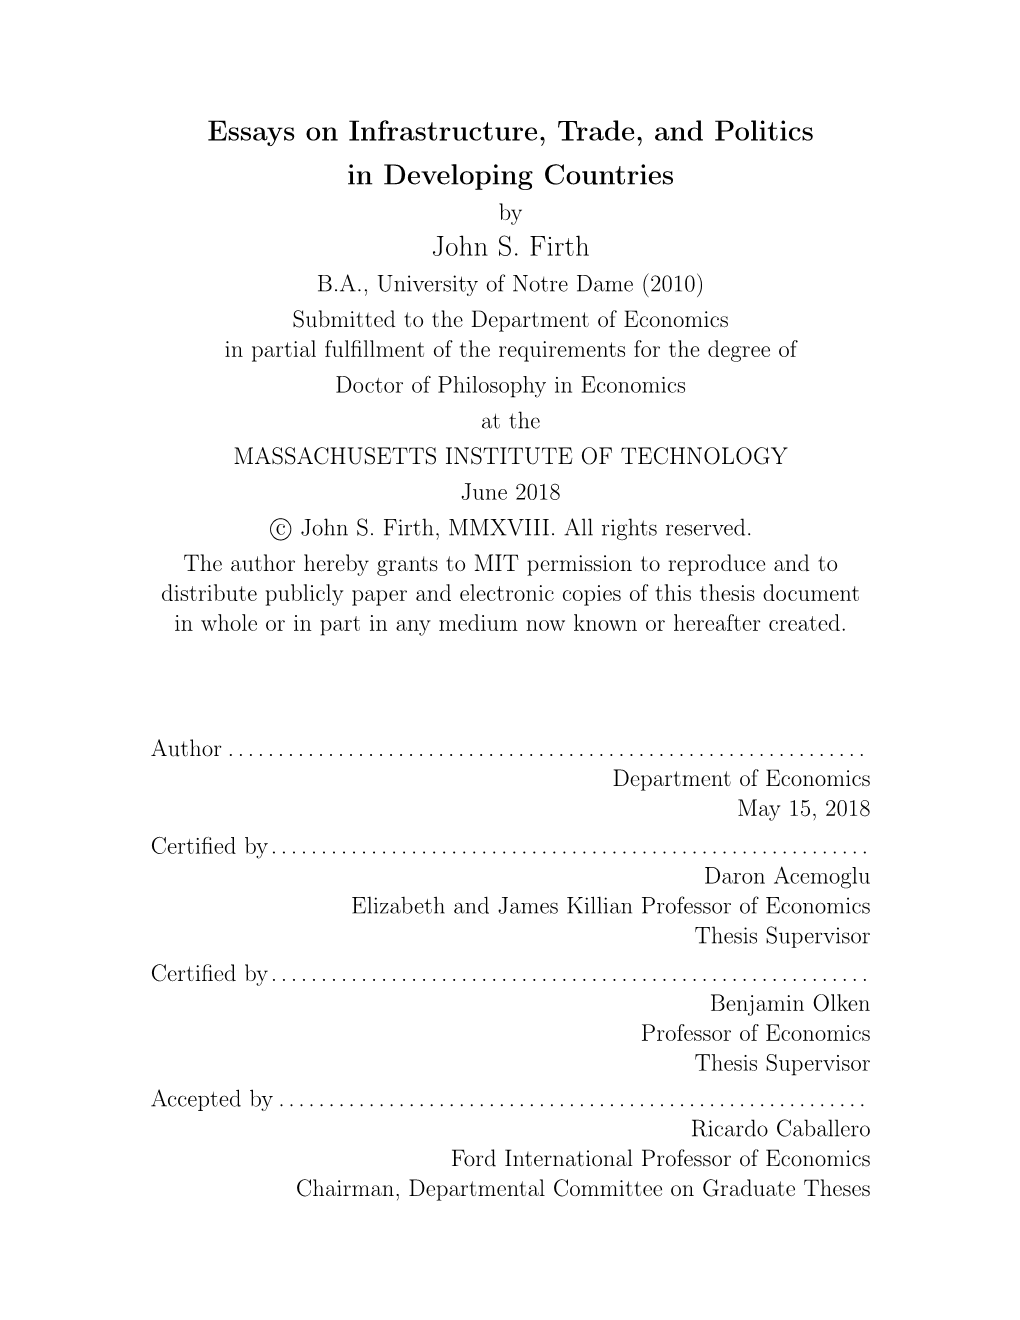 Essays on Infrastructure, Trade, and Politics in Developing Countries John S. Firth